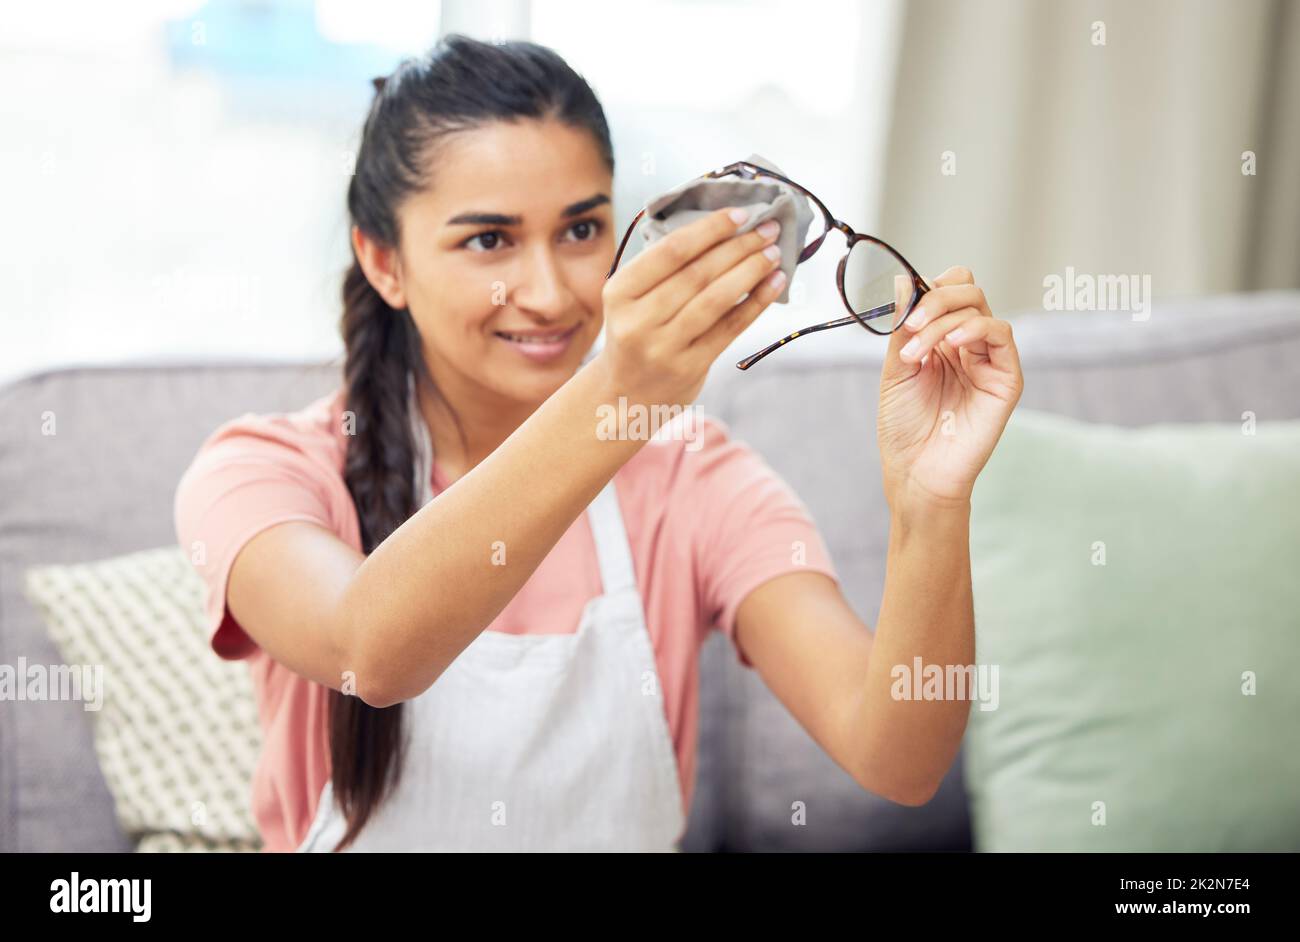 All the dirt is gone and I can see clearly again. Shot of a young woman cleaning her glasses while sitting at home. Stock Photo